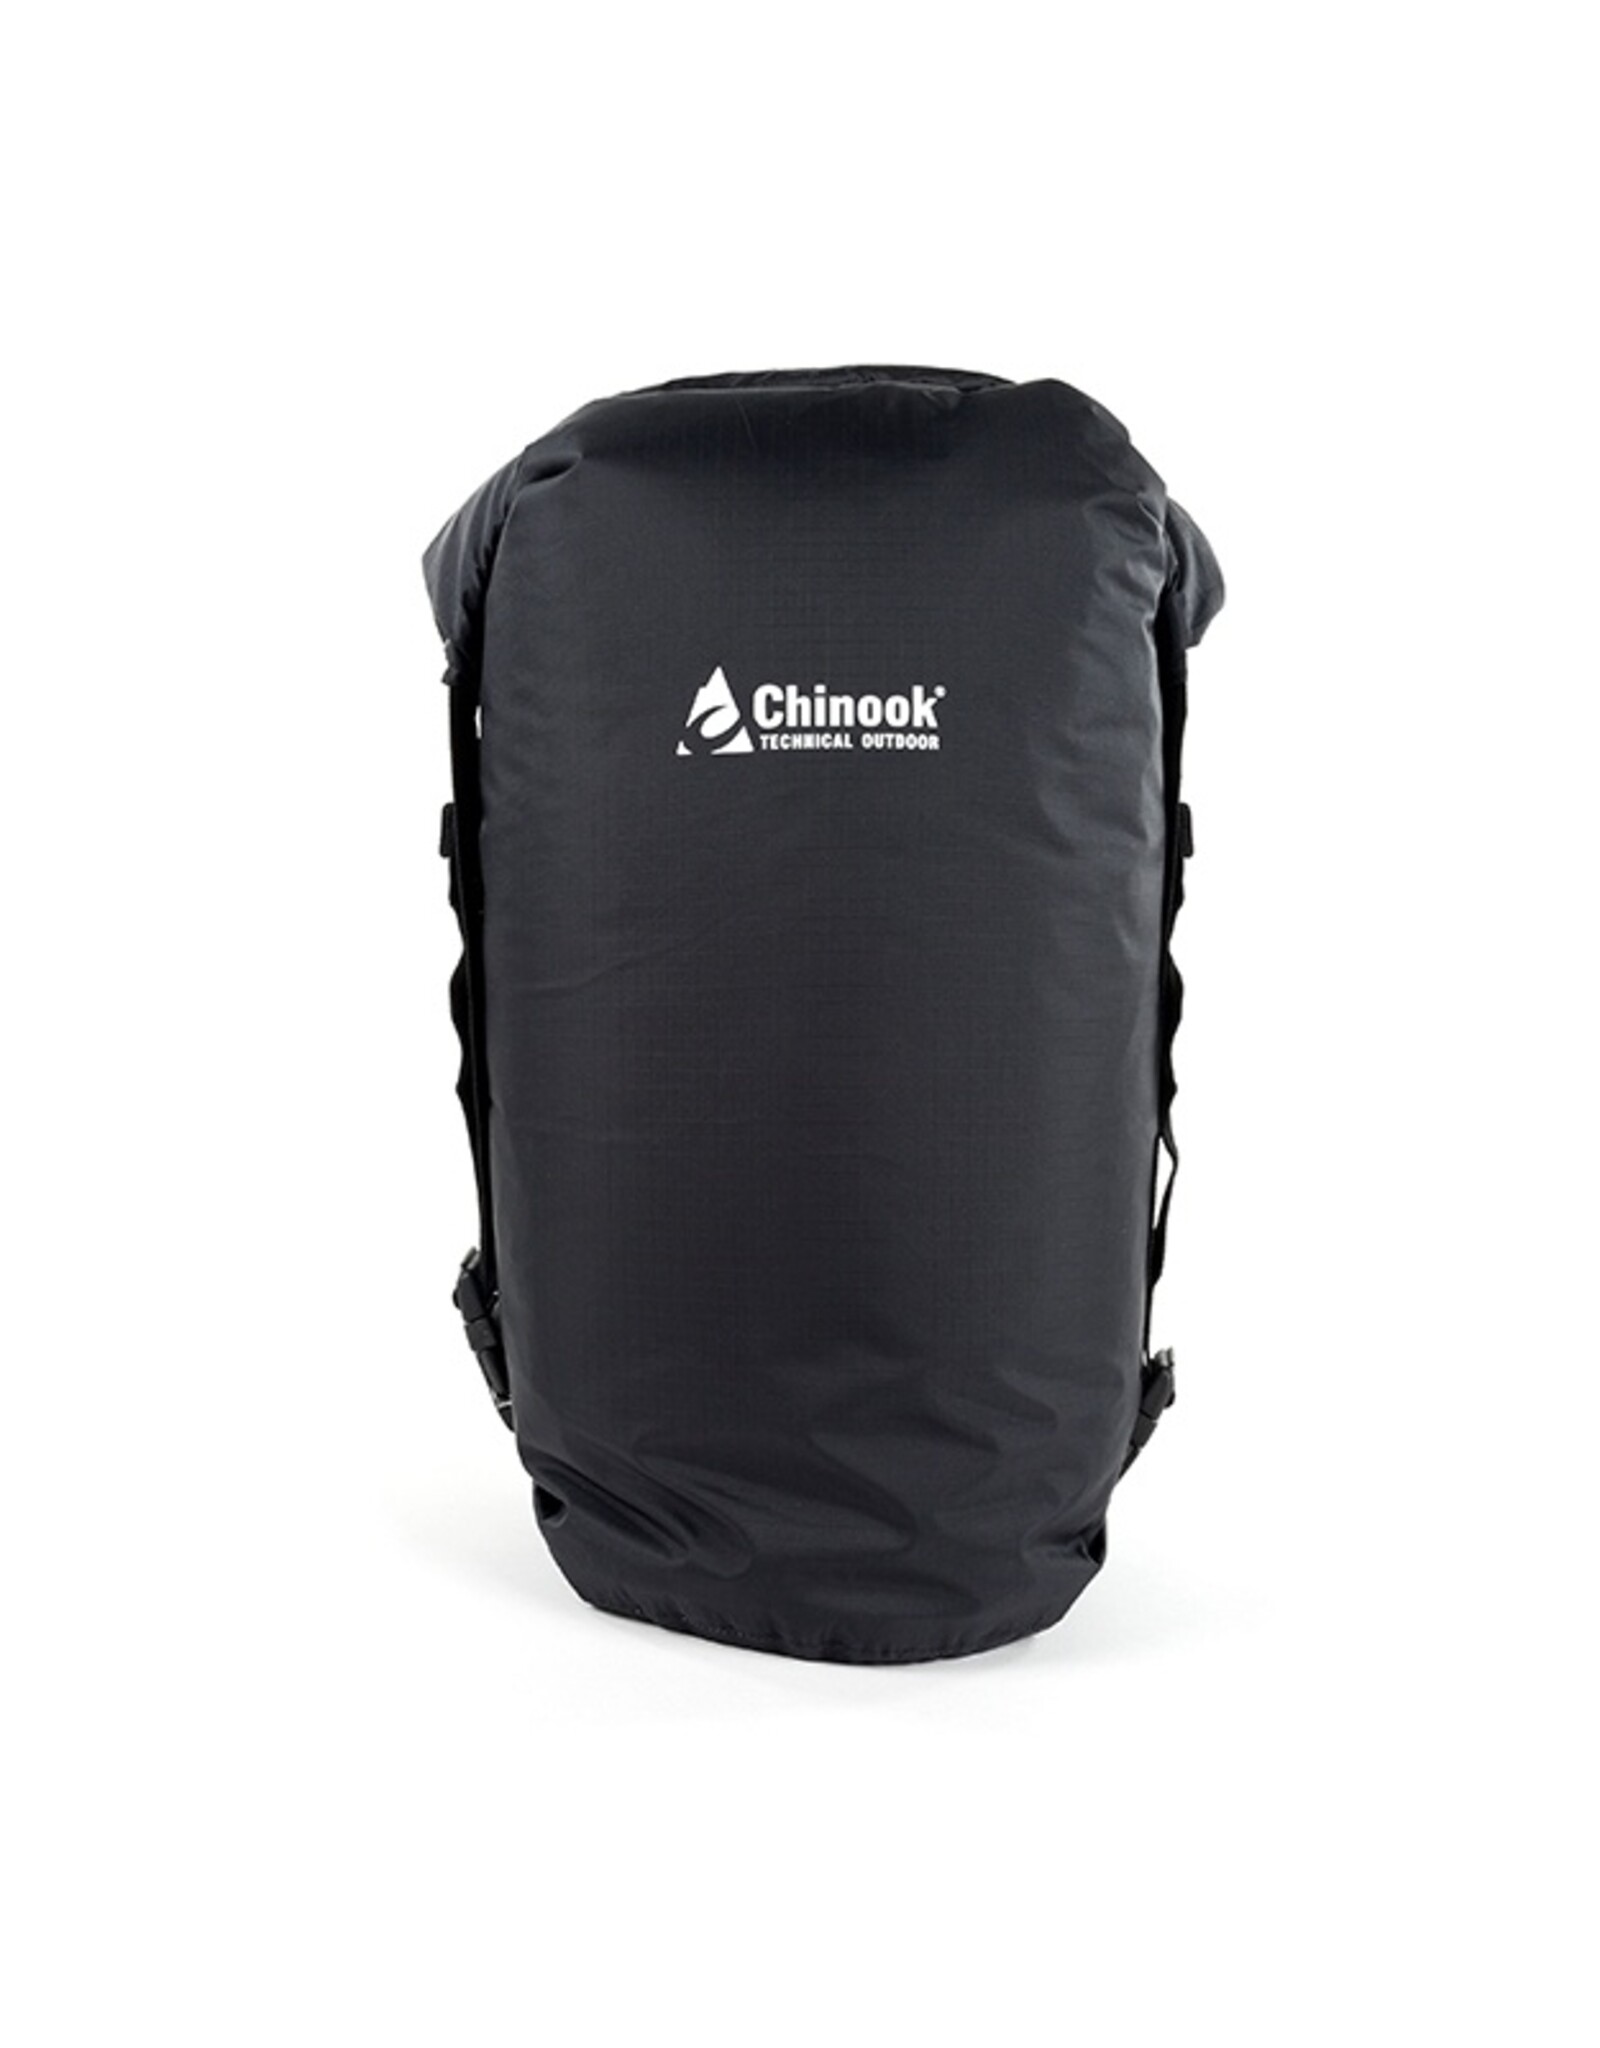 CHINOOK TECHNICAL OUTDOOR ULTRALITE COMPRESSION DRYSACK